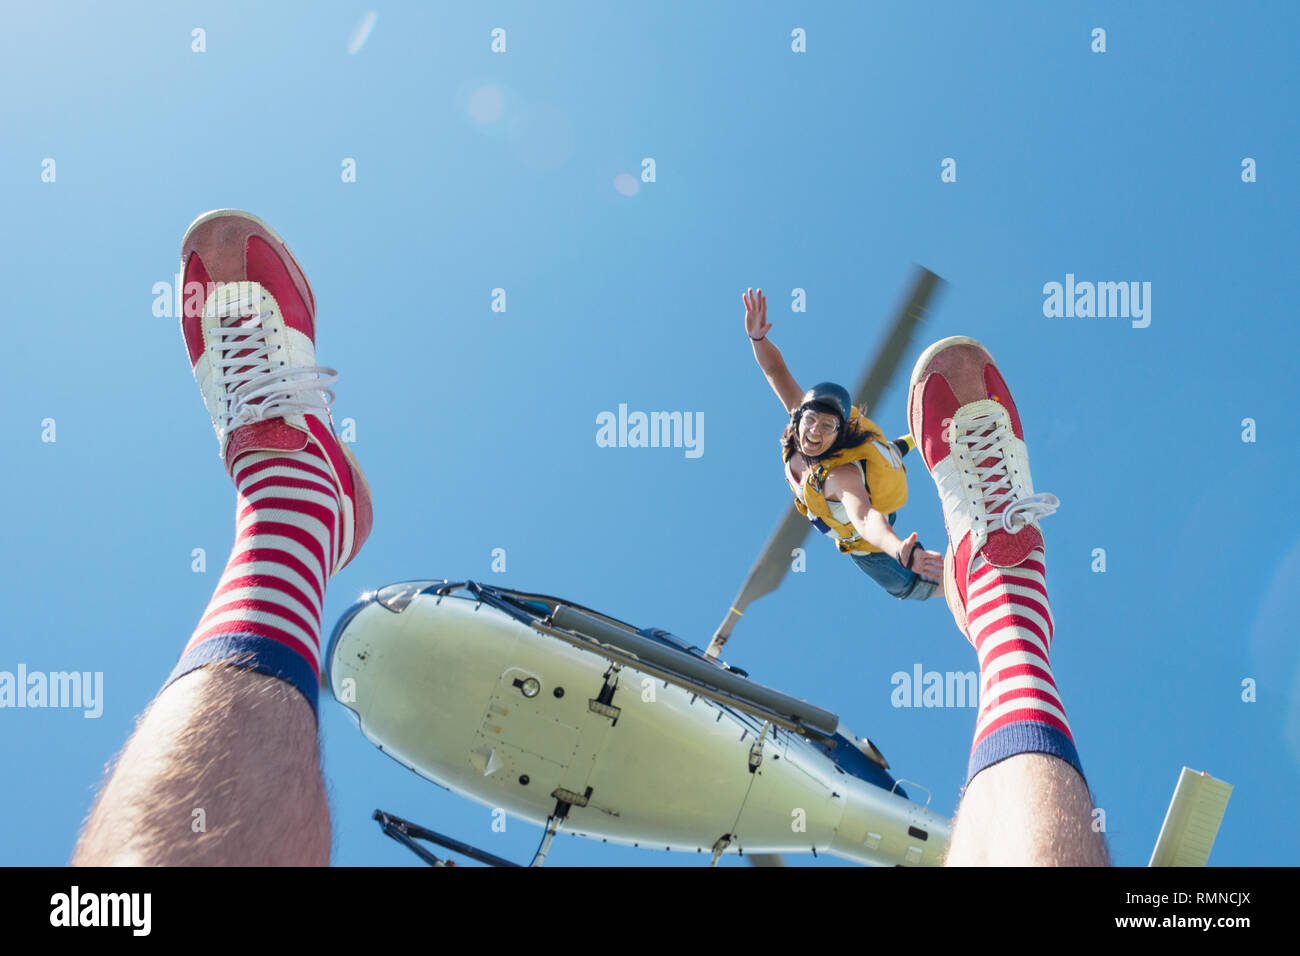 People in air, low section Stock Photo